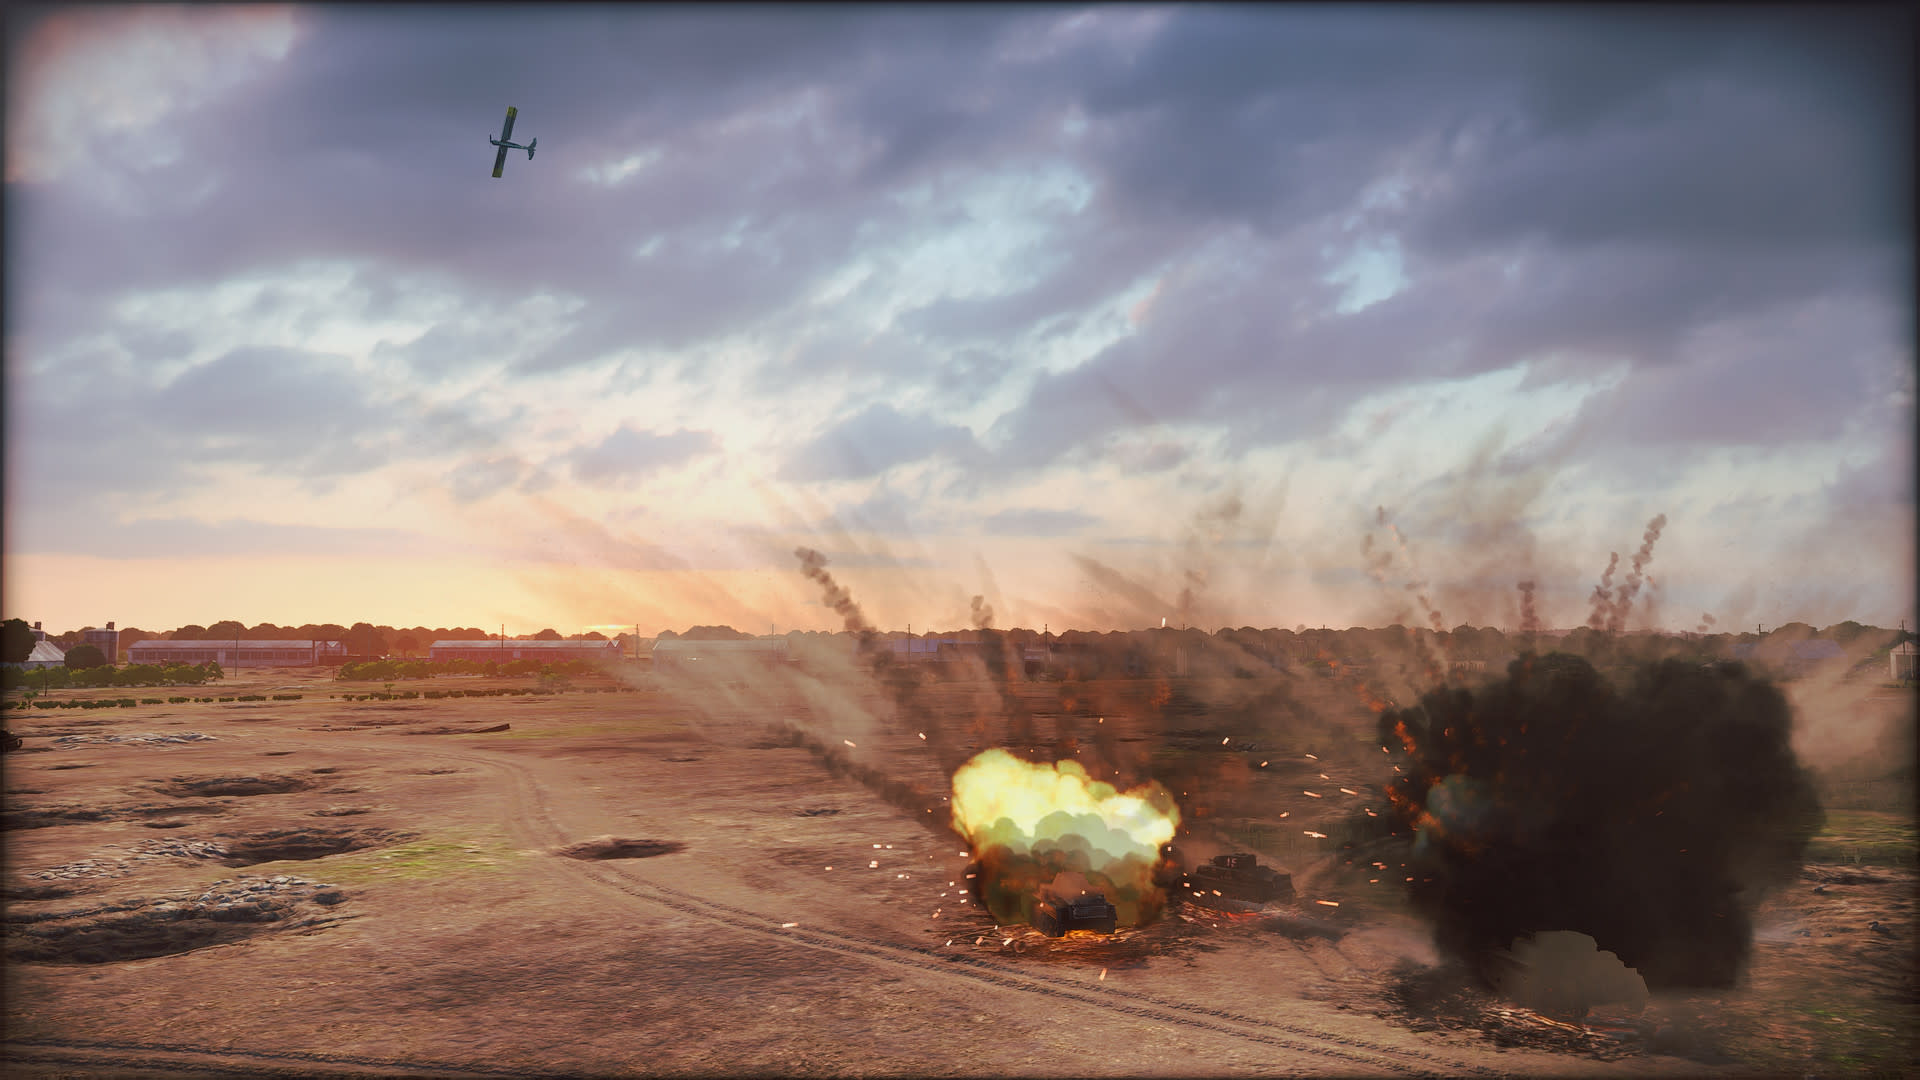 Steel Division: Normandy 44 - Second Wave (screenshot 4)